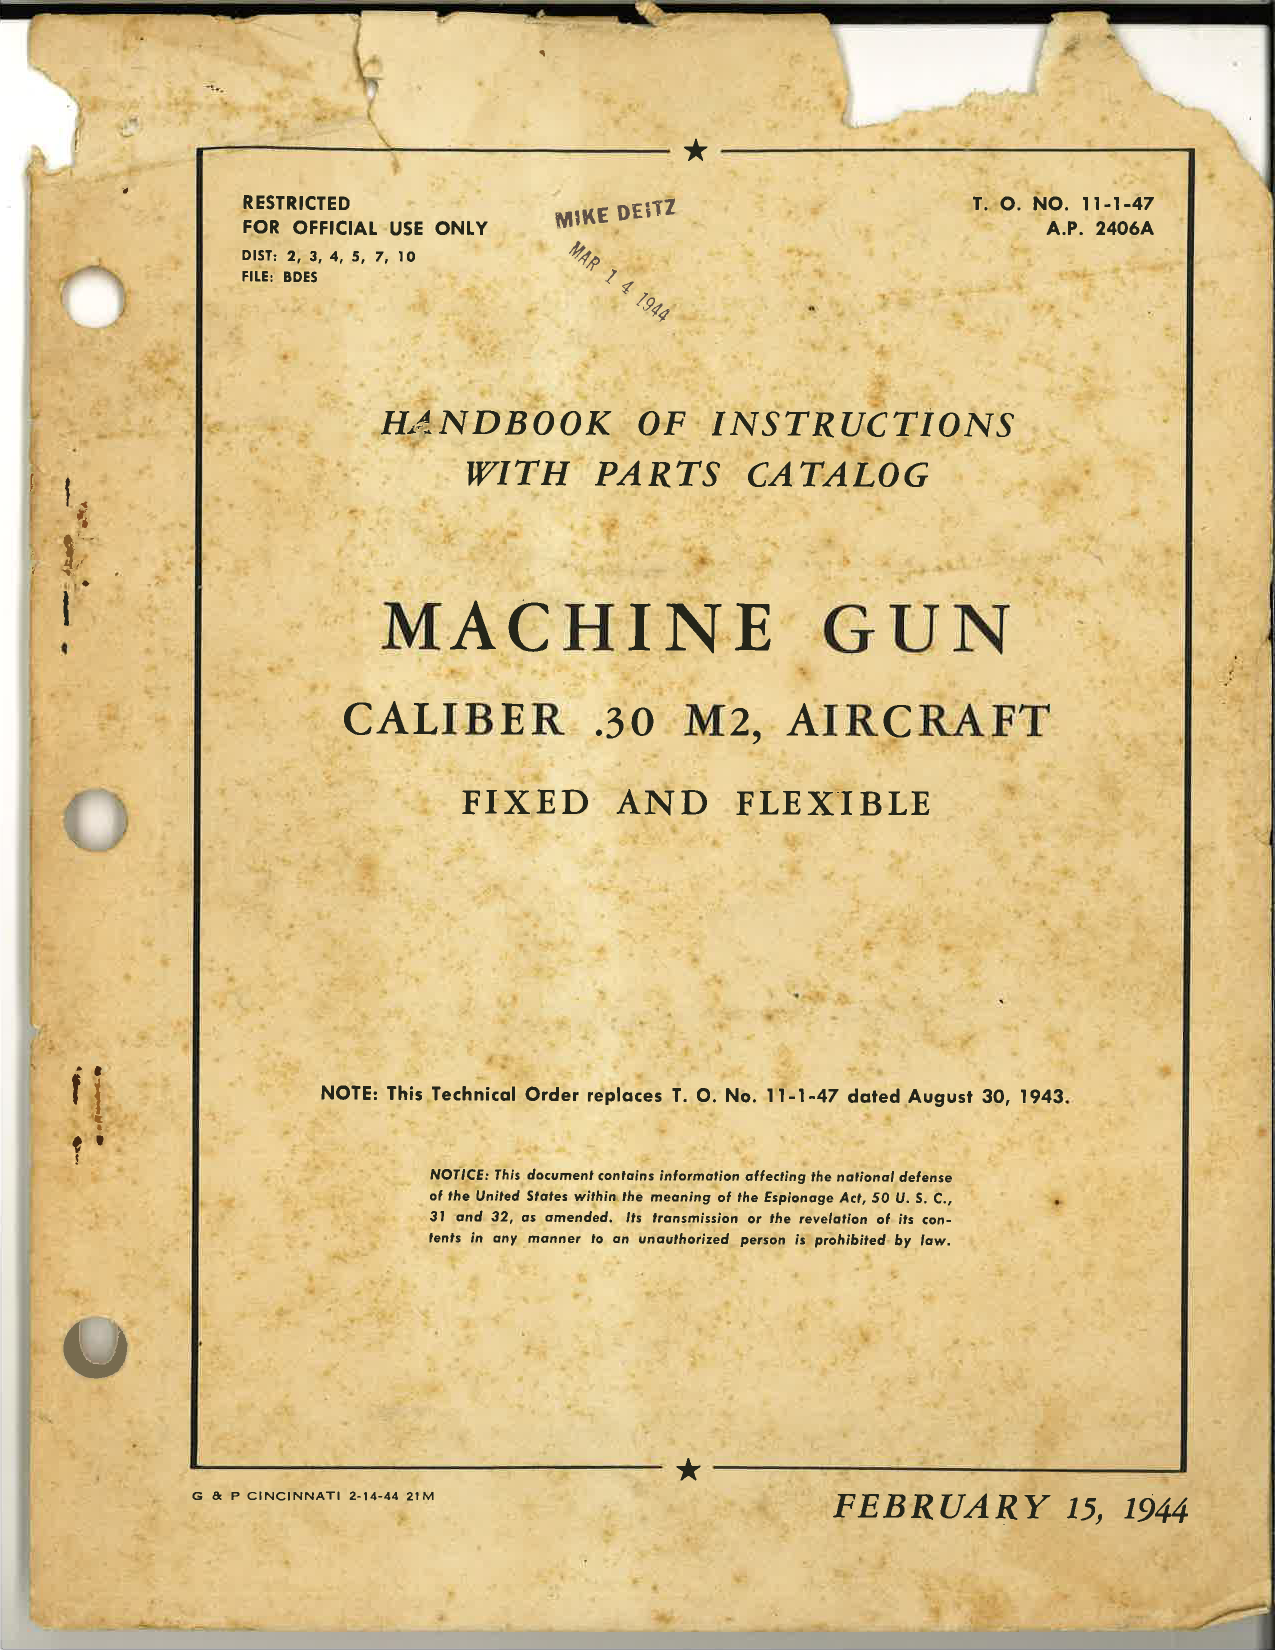 Sample page 1 from AirCorps Library document: Handbook of Instructions with Parts Catalog for Machine Gun Caliber .30 M2, Fixed and Flexible